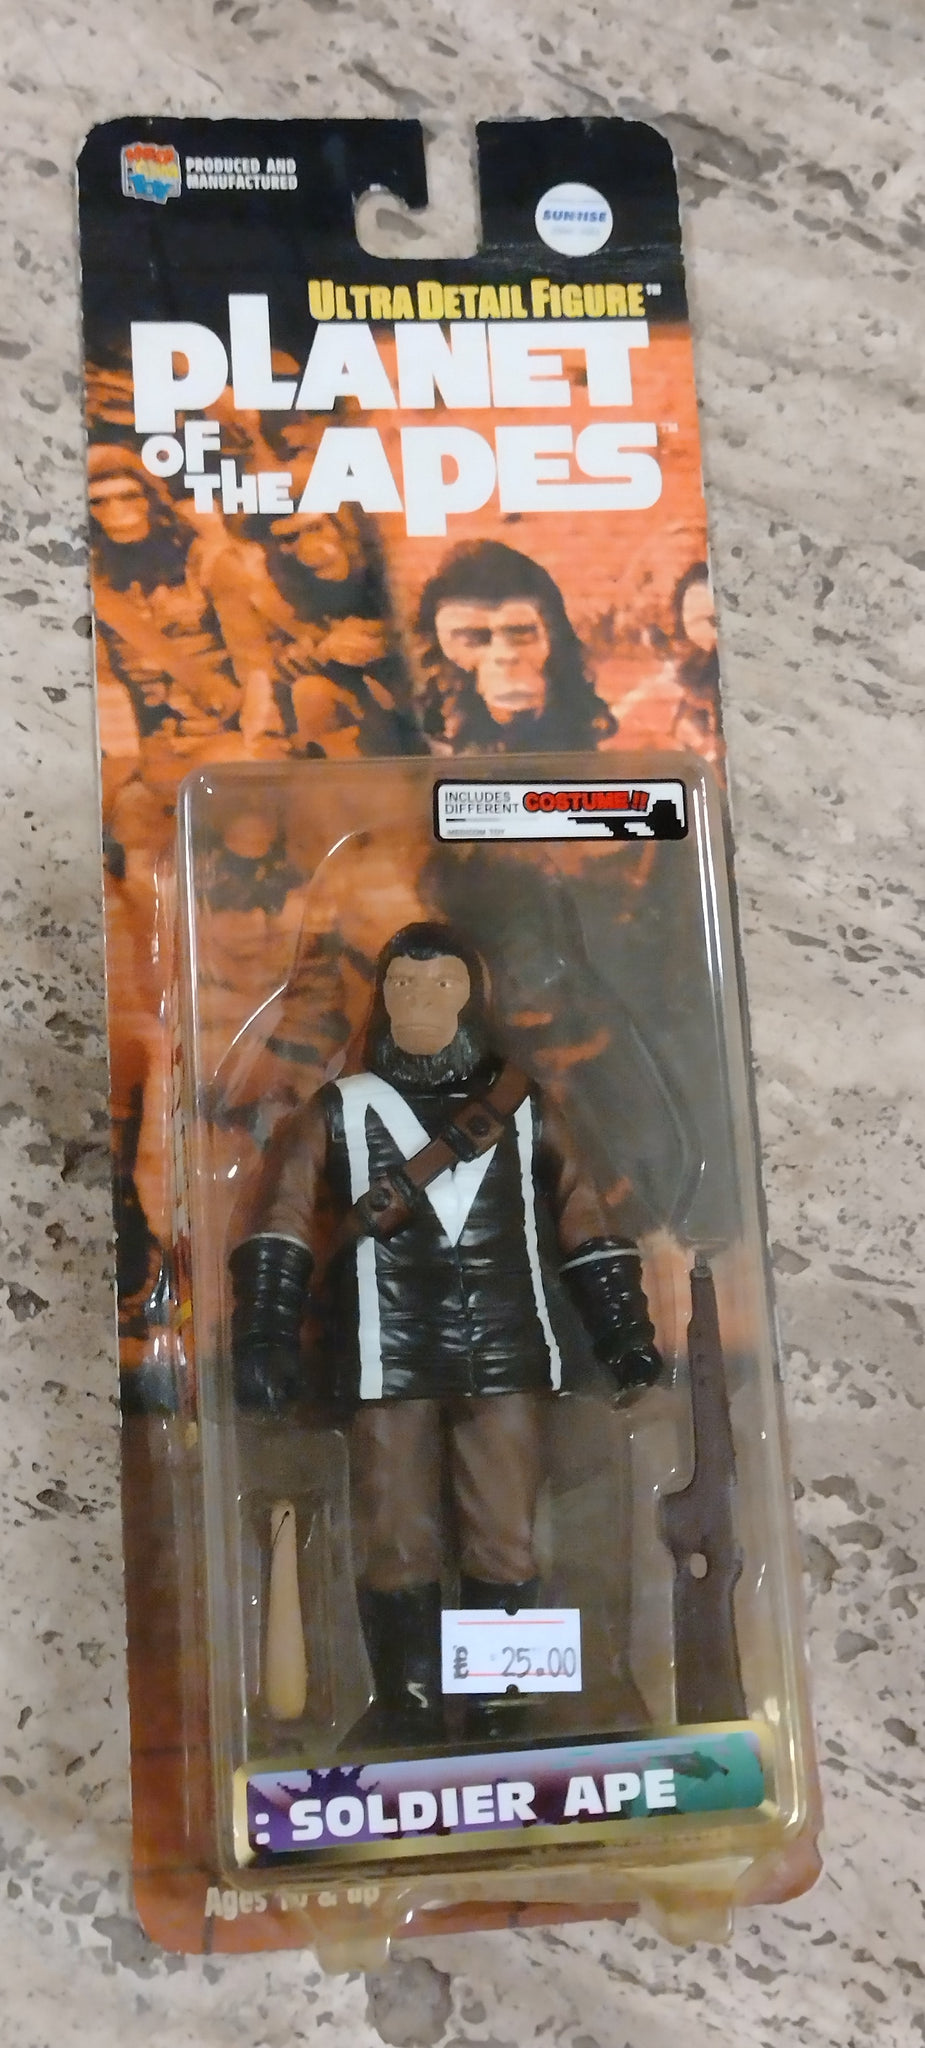 Planet of the Apes Soldier Ape (B) Ultra Detail Figure